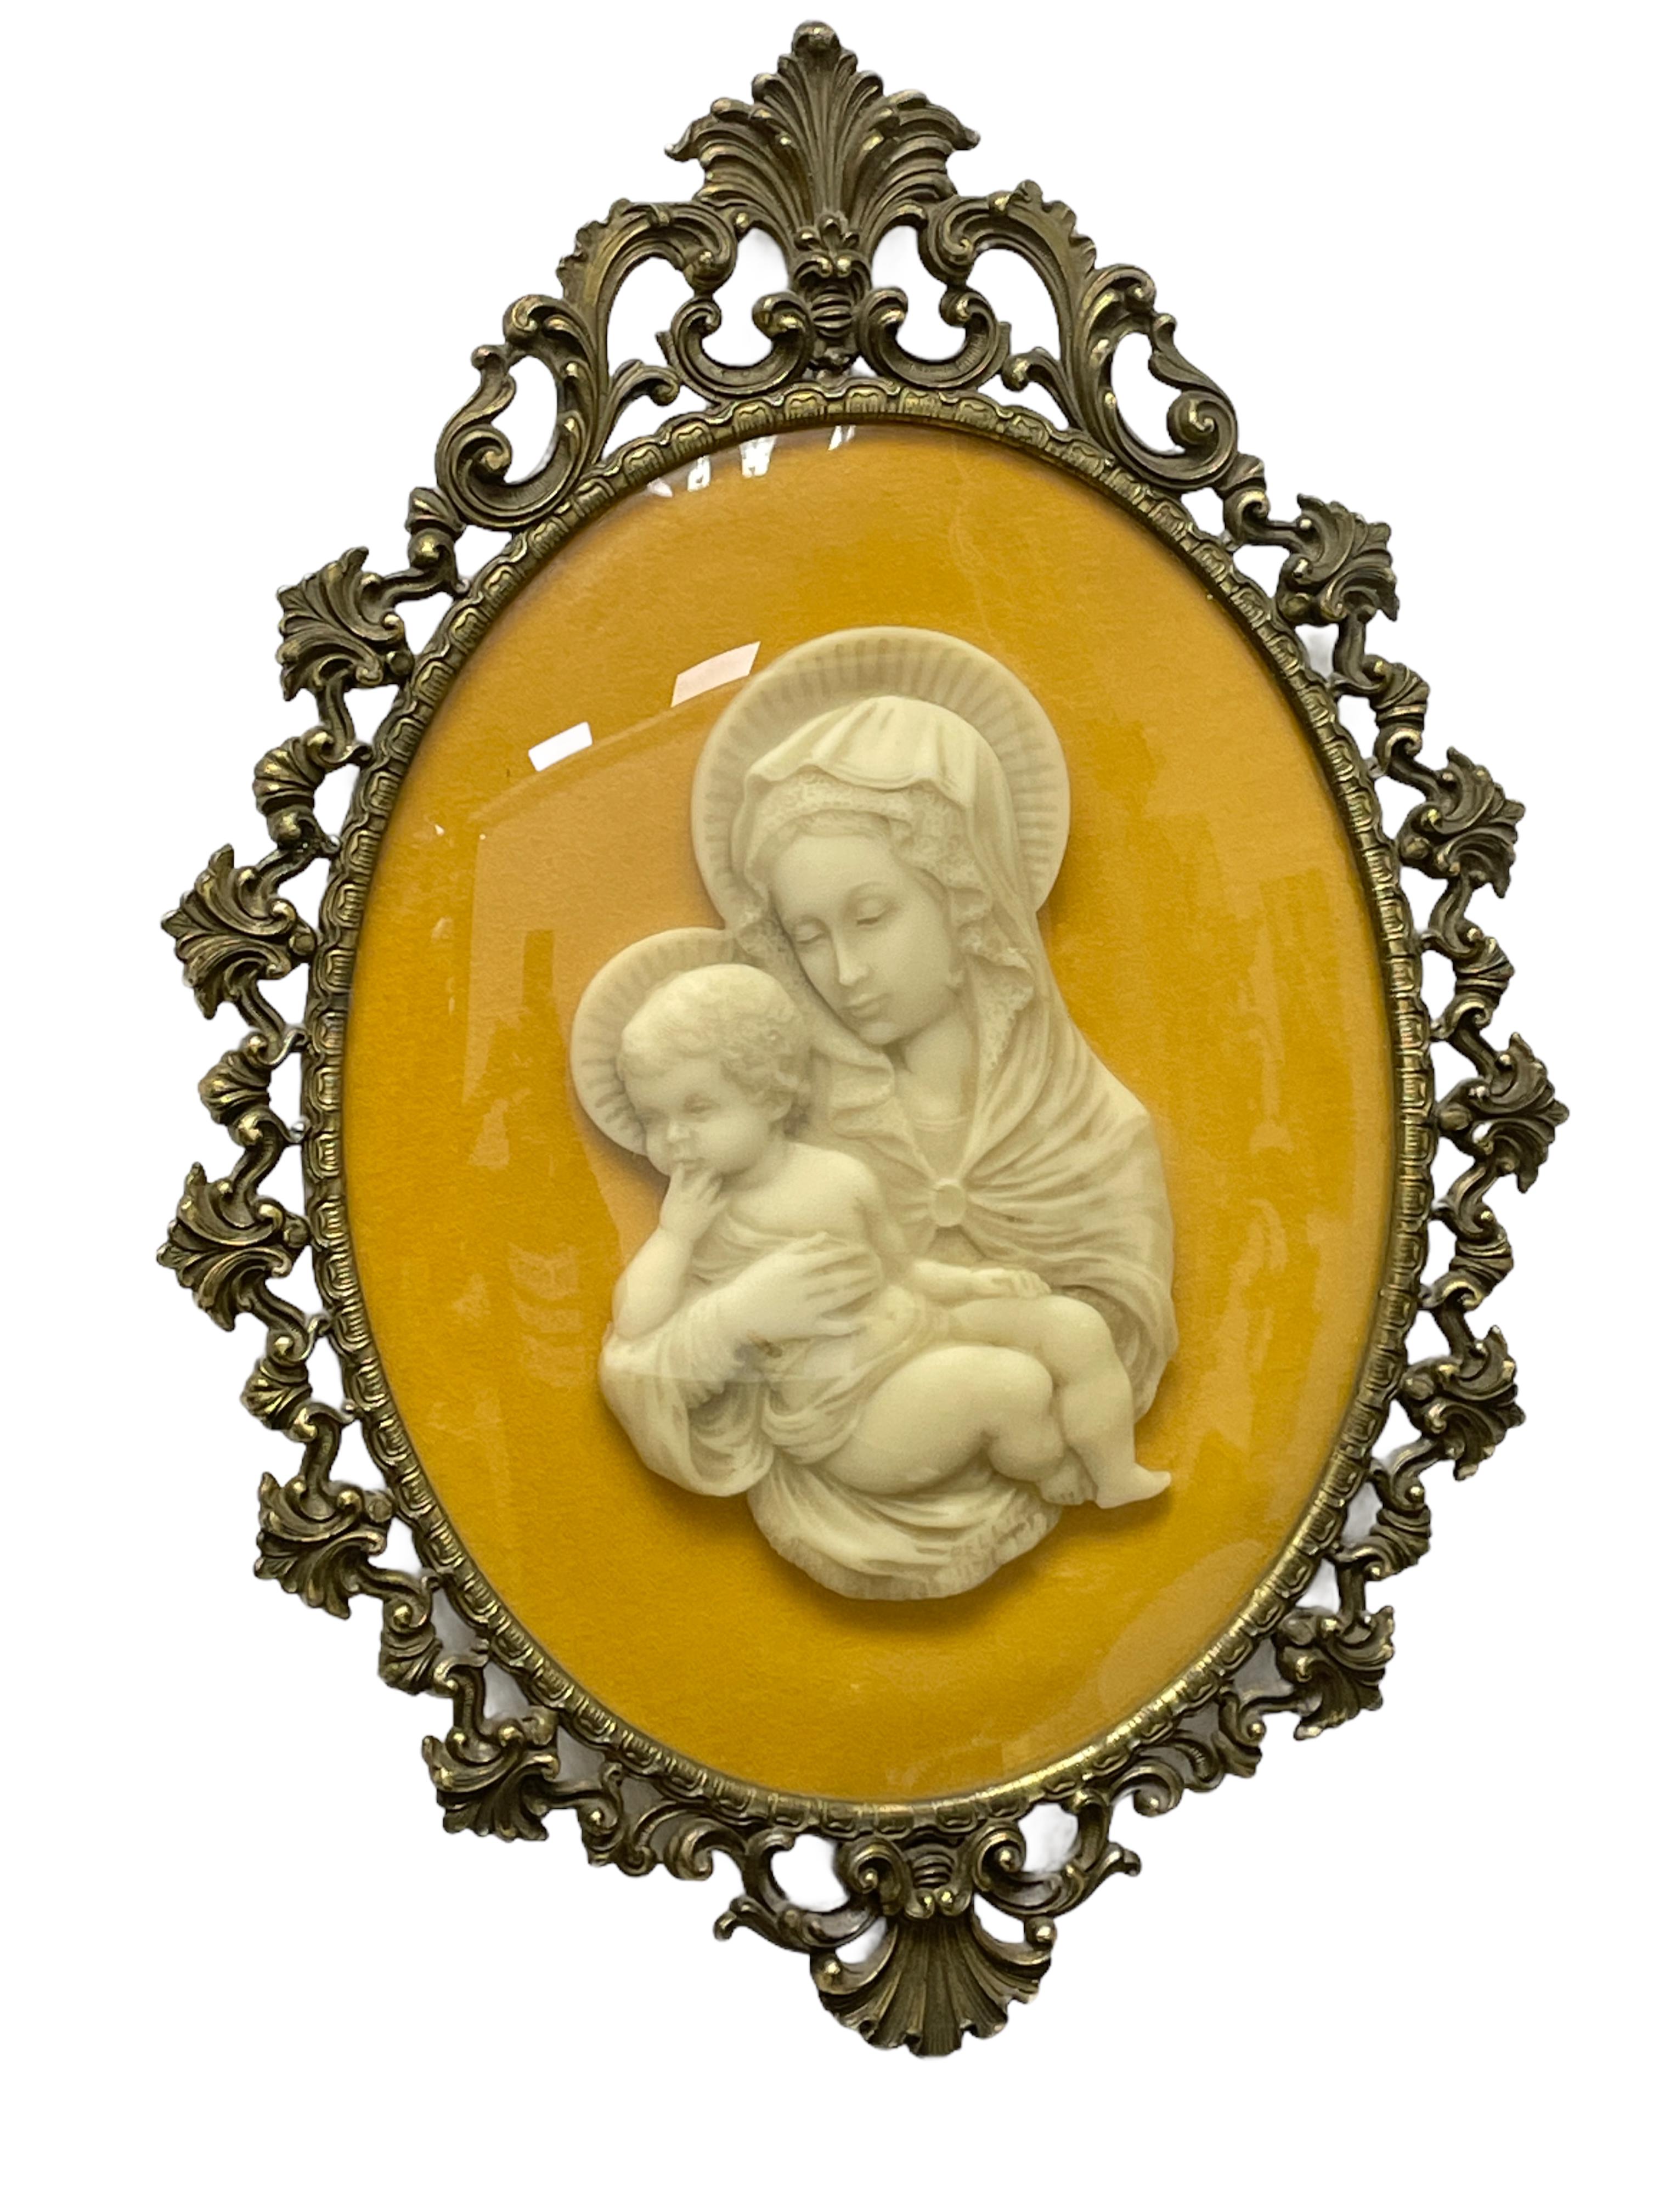 Folk Art Framed Mary and Jesus Child Wax Miniature Portrait, Brass and Glass Italy, 1930s For Sale